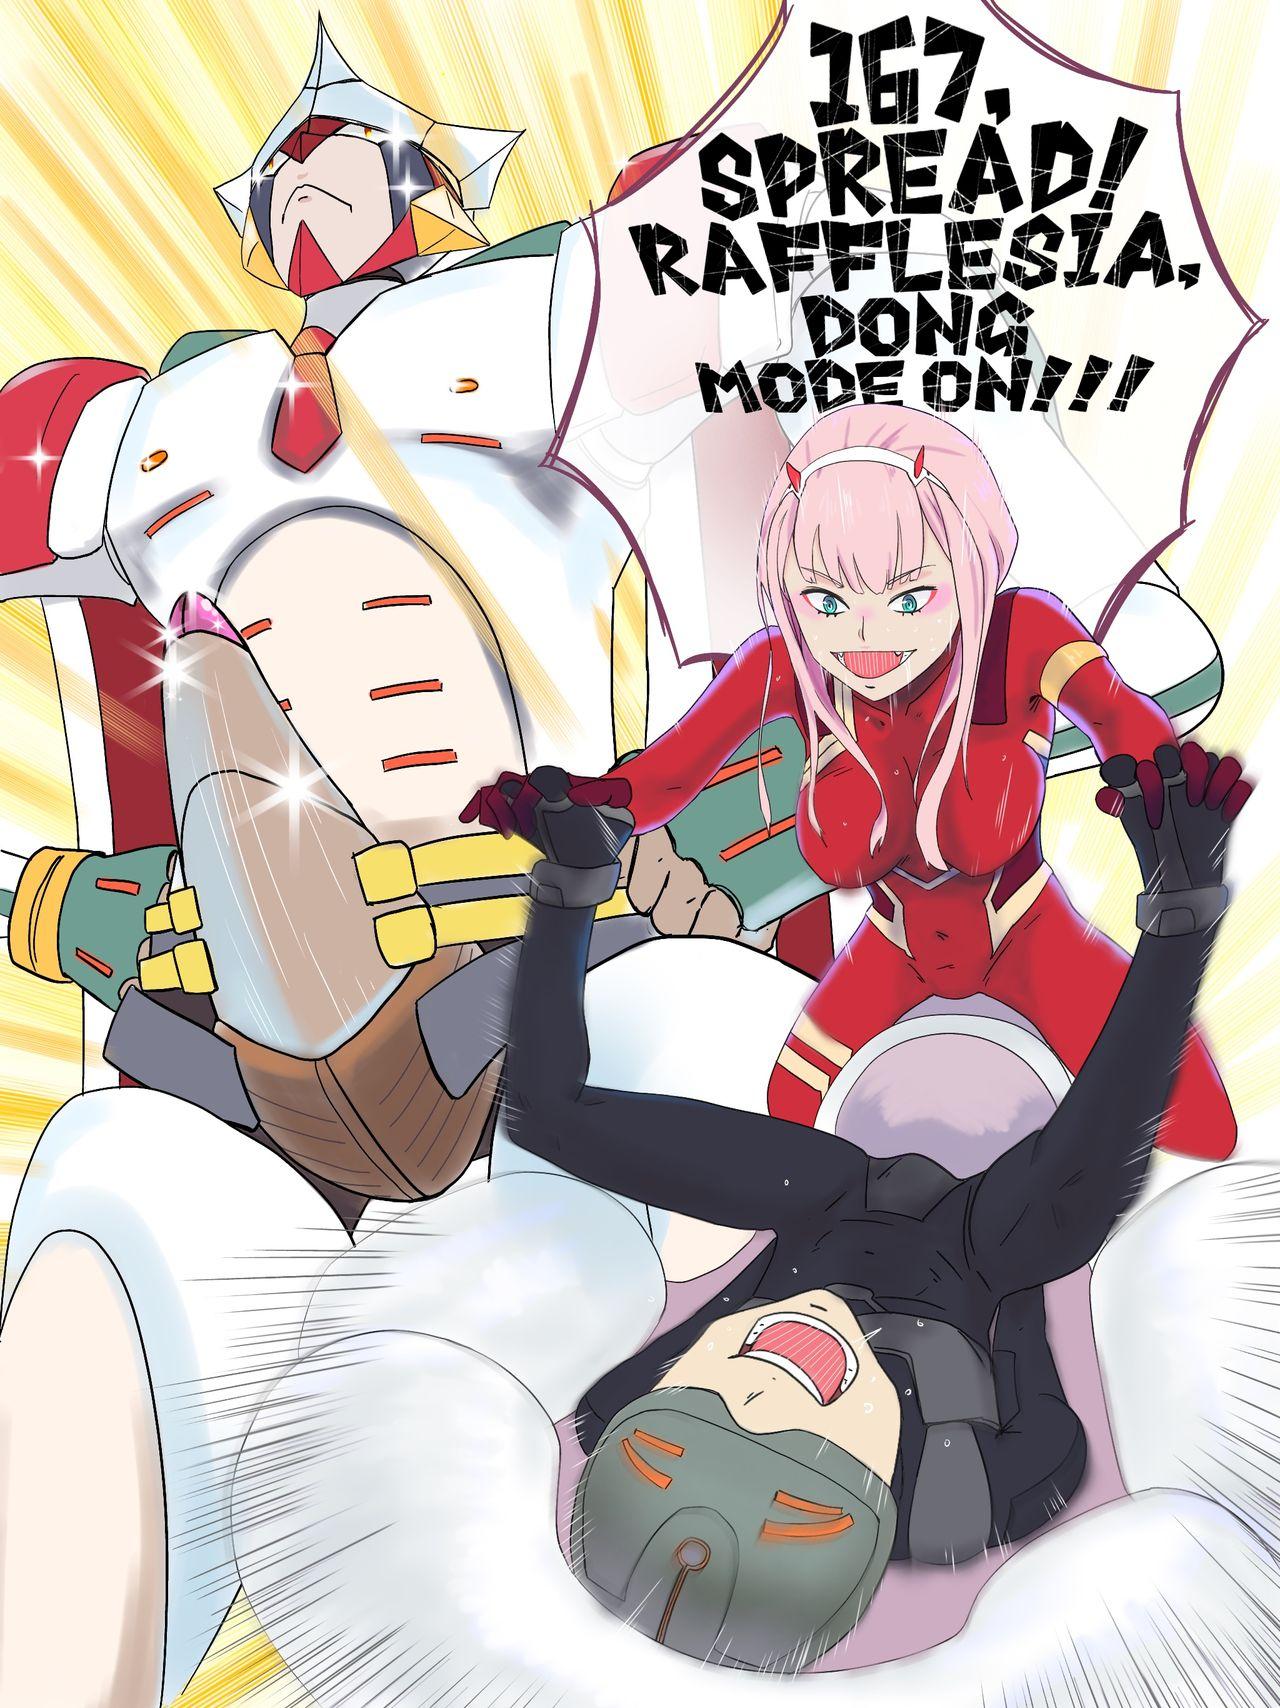 Real Amateur [supralpaca] Ding-a-ling in the FranXY (DARLING in the FRANXX) [English] - Darling in the franxx Teen Hardcore - Page 3